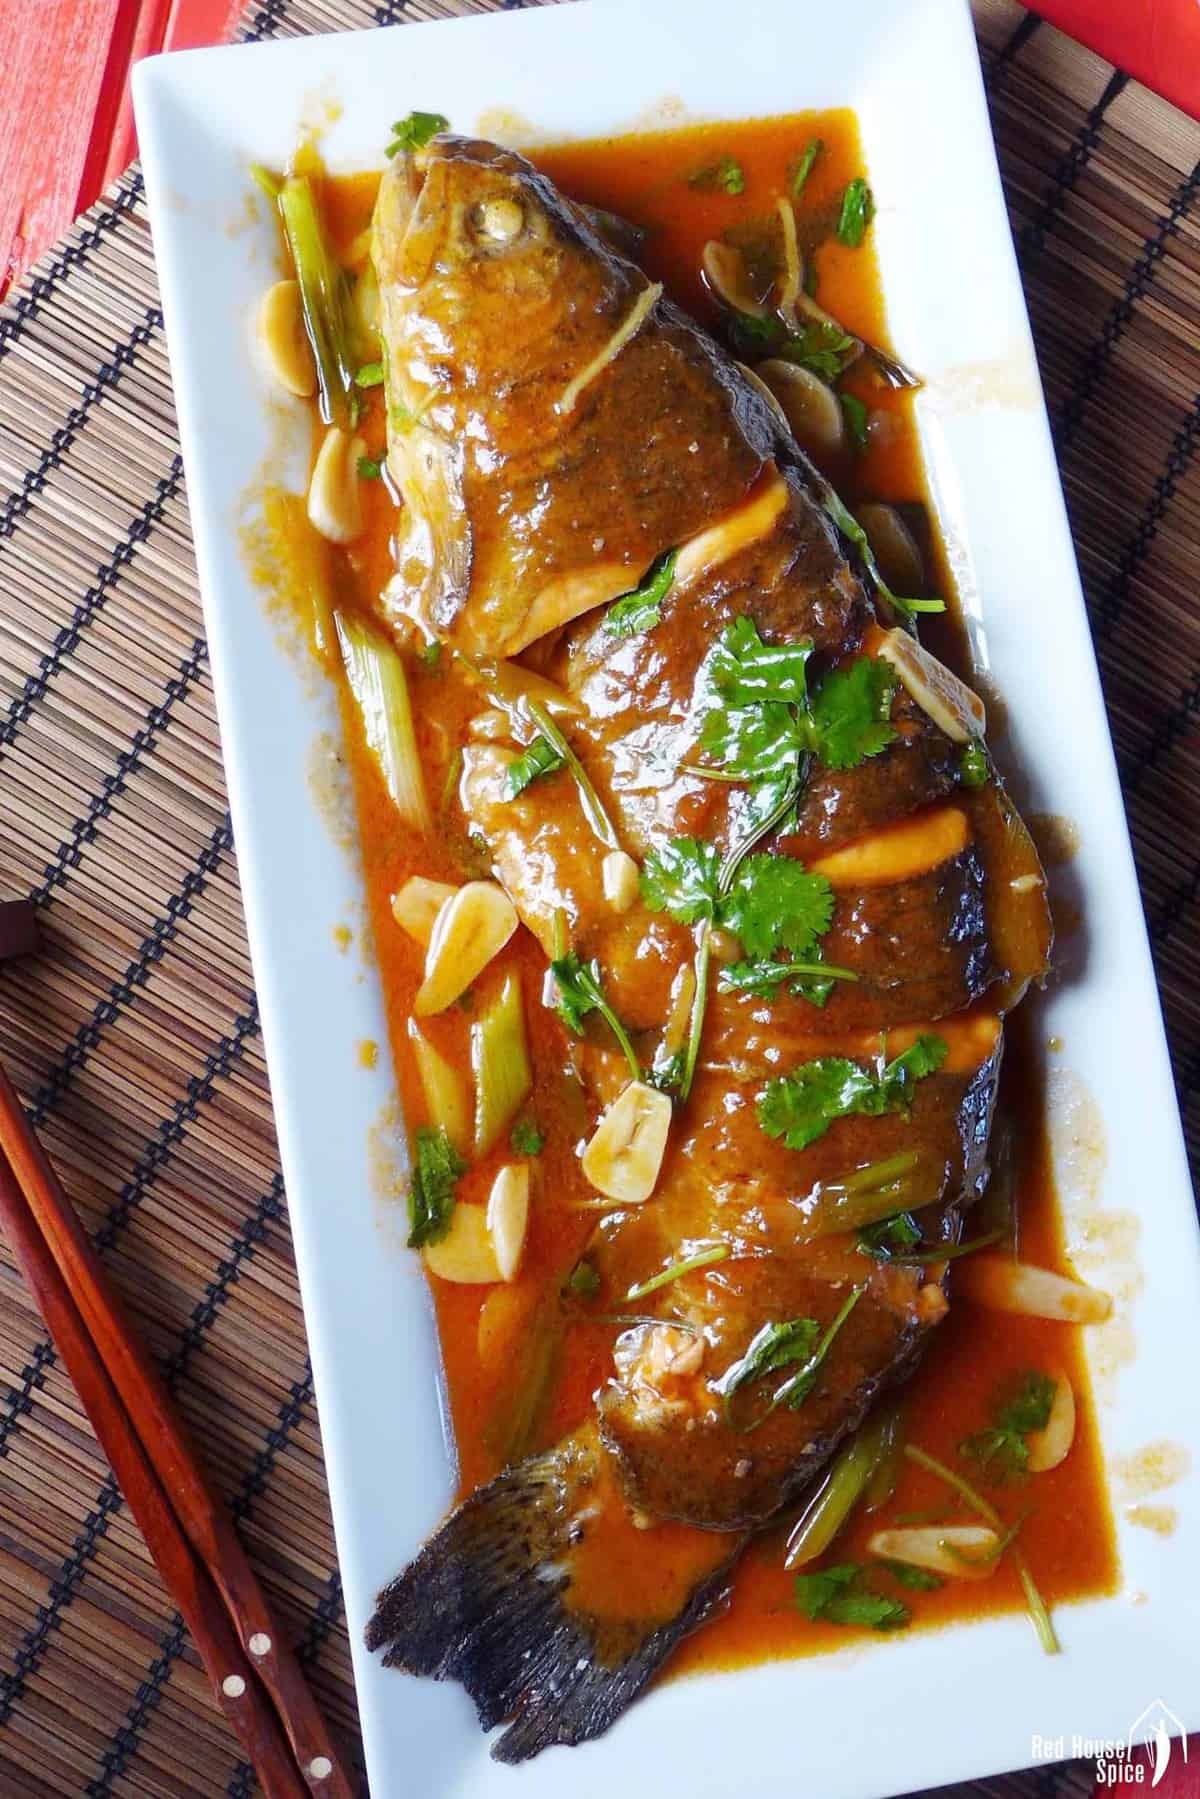 A whole fish with sweet and sour sauce